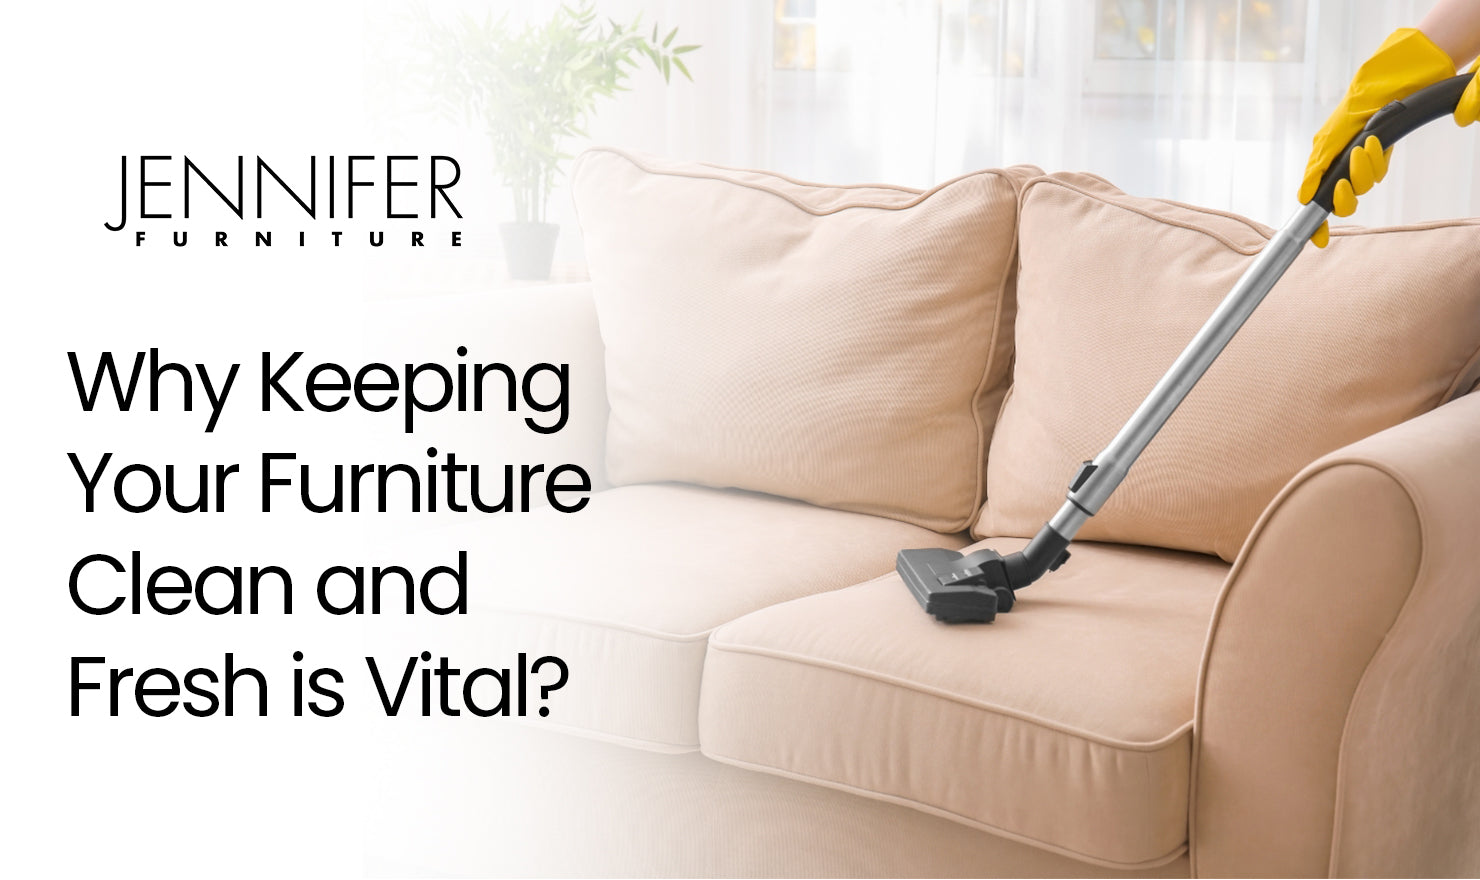 Why Keeping Your Furniture Clean and Fresh is Vital